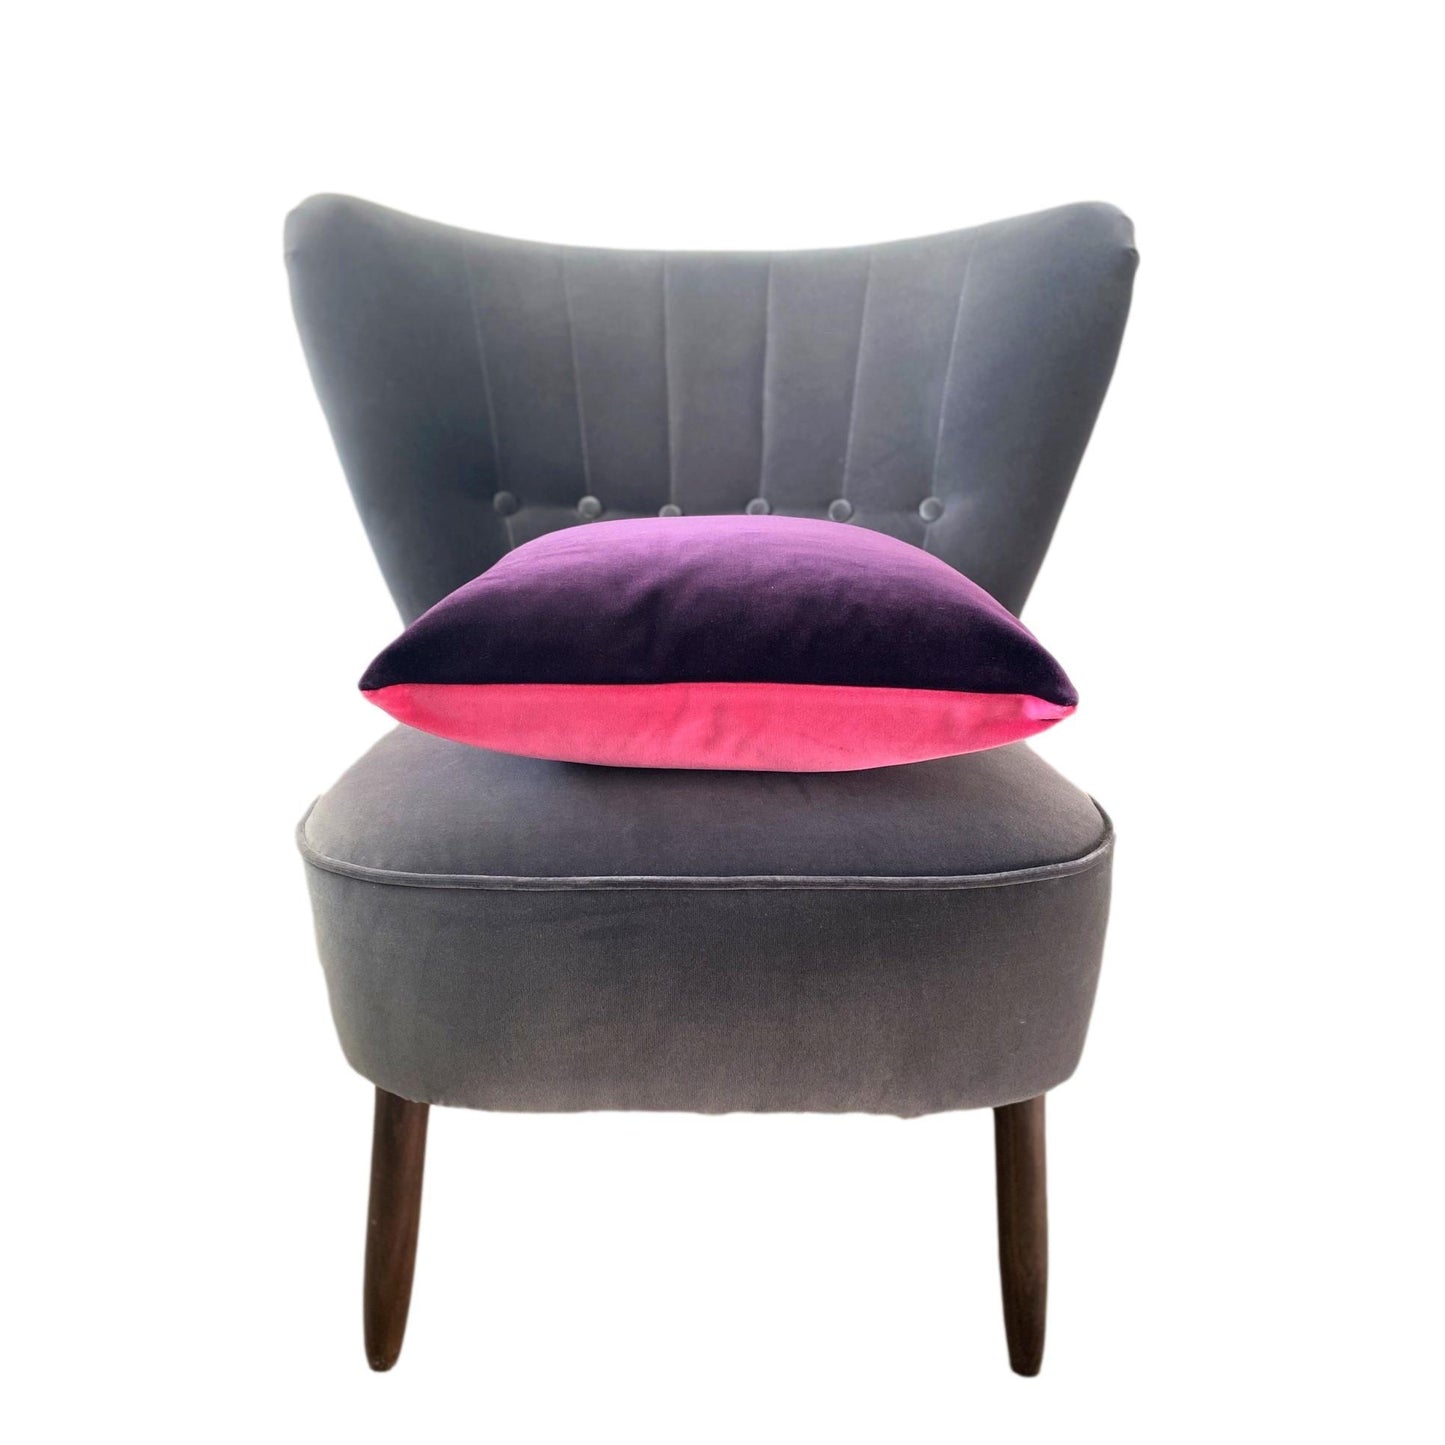 plum velvet cushion cover with bright pink